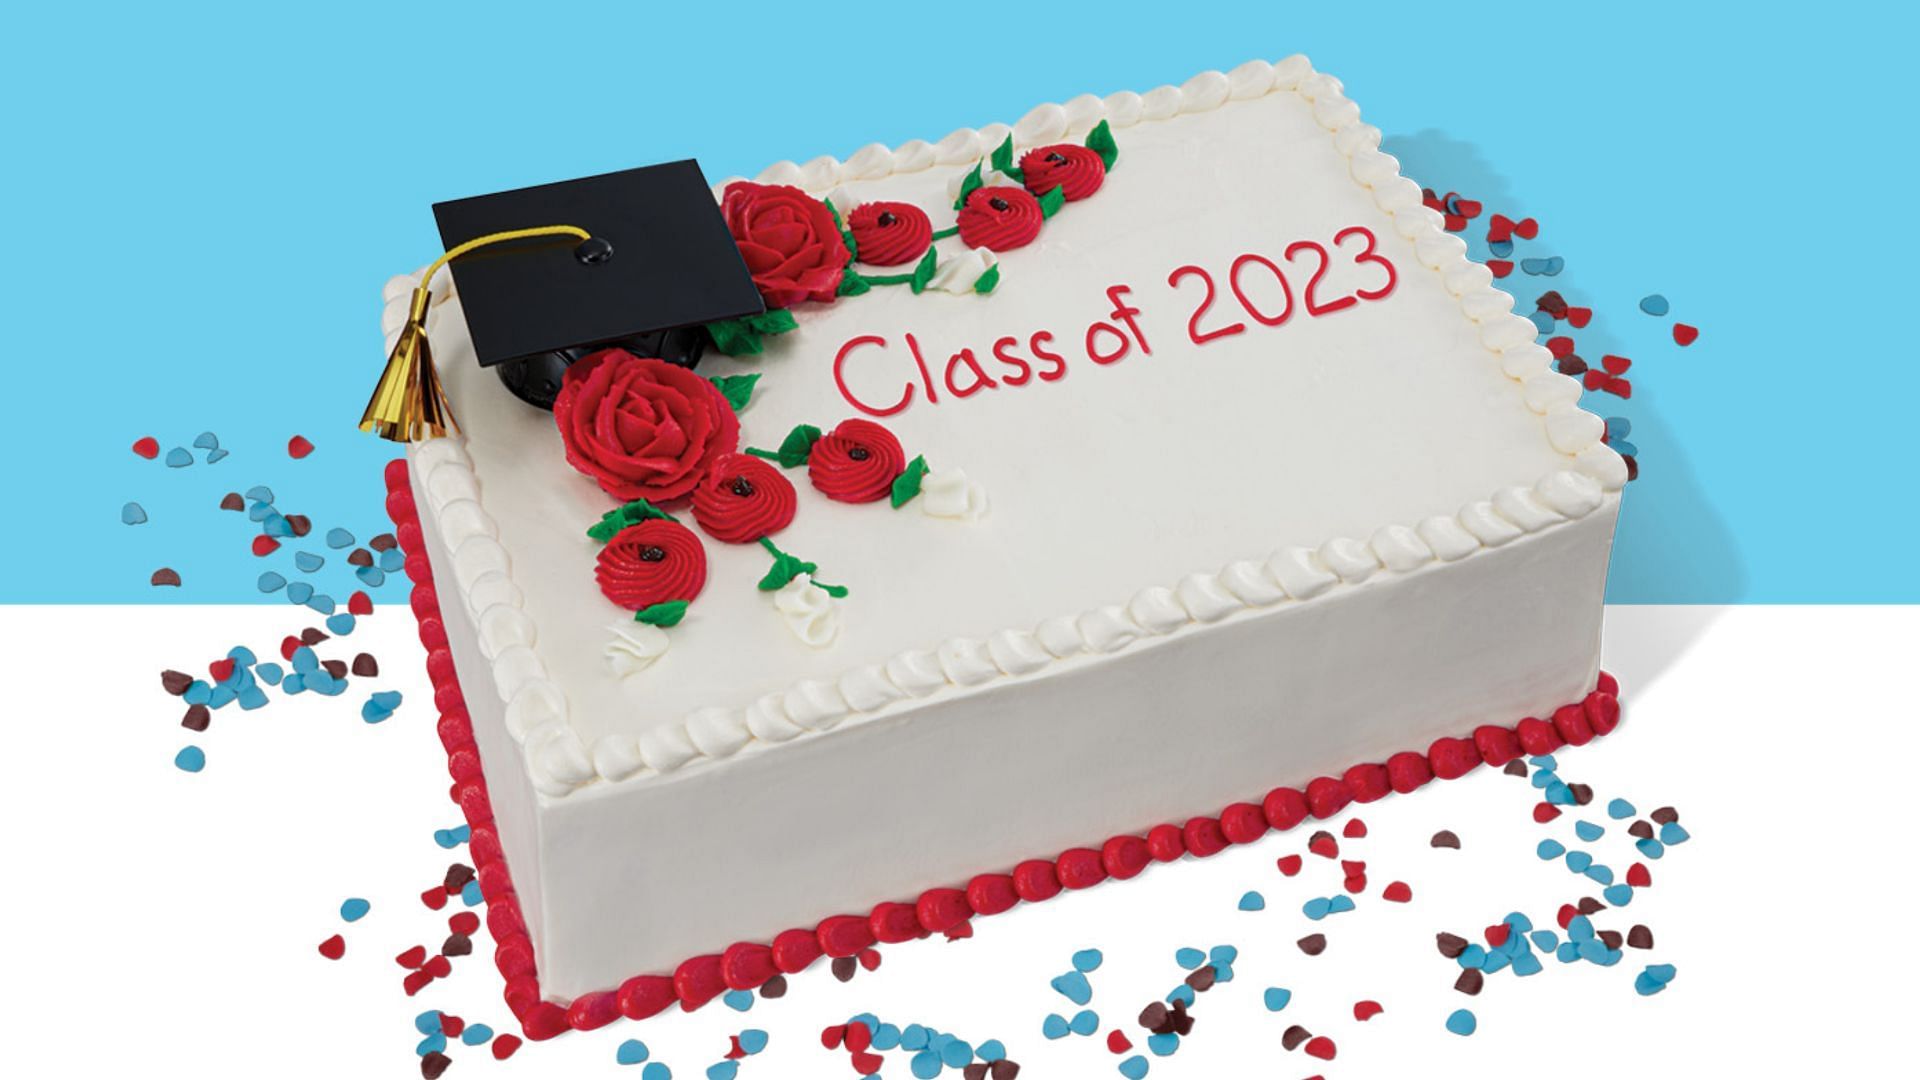 The new Turn the Tassel Graduation Cake is available to order between April 1 and July 15 (Image via Baskin Robbins)